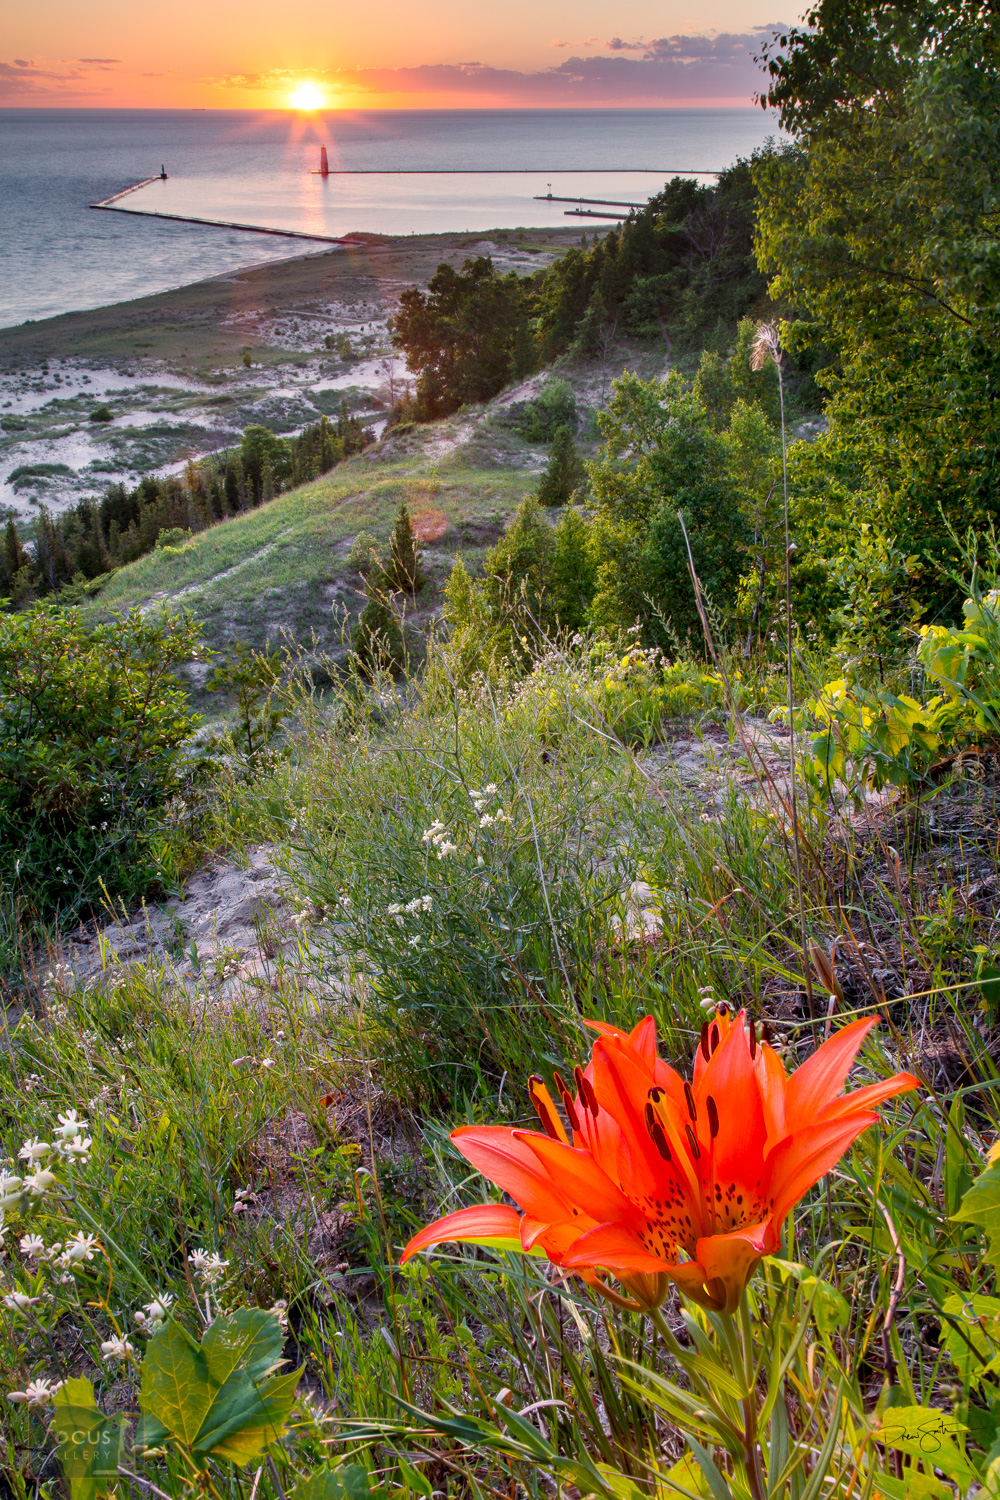 Wood lily blossom on a hillside overlooking sunset on Lake Michigan.